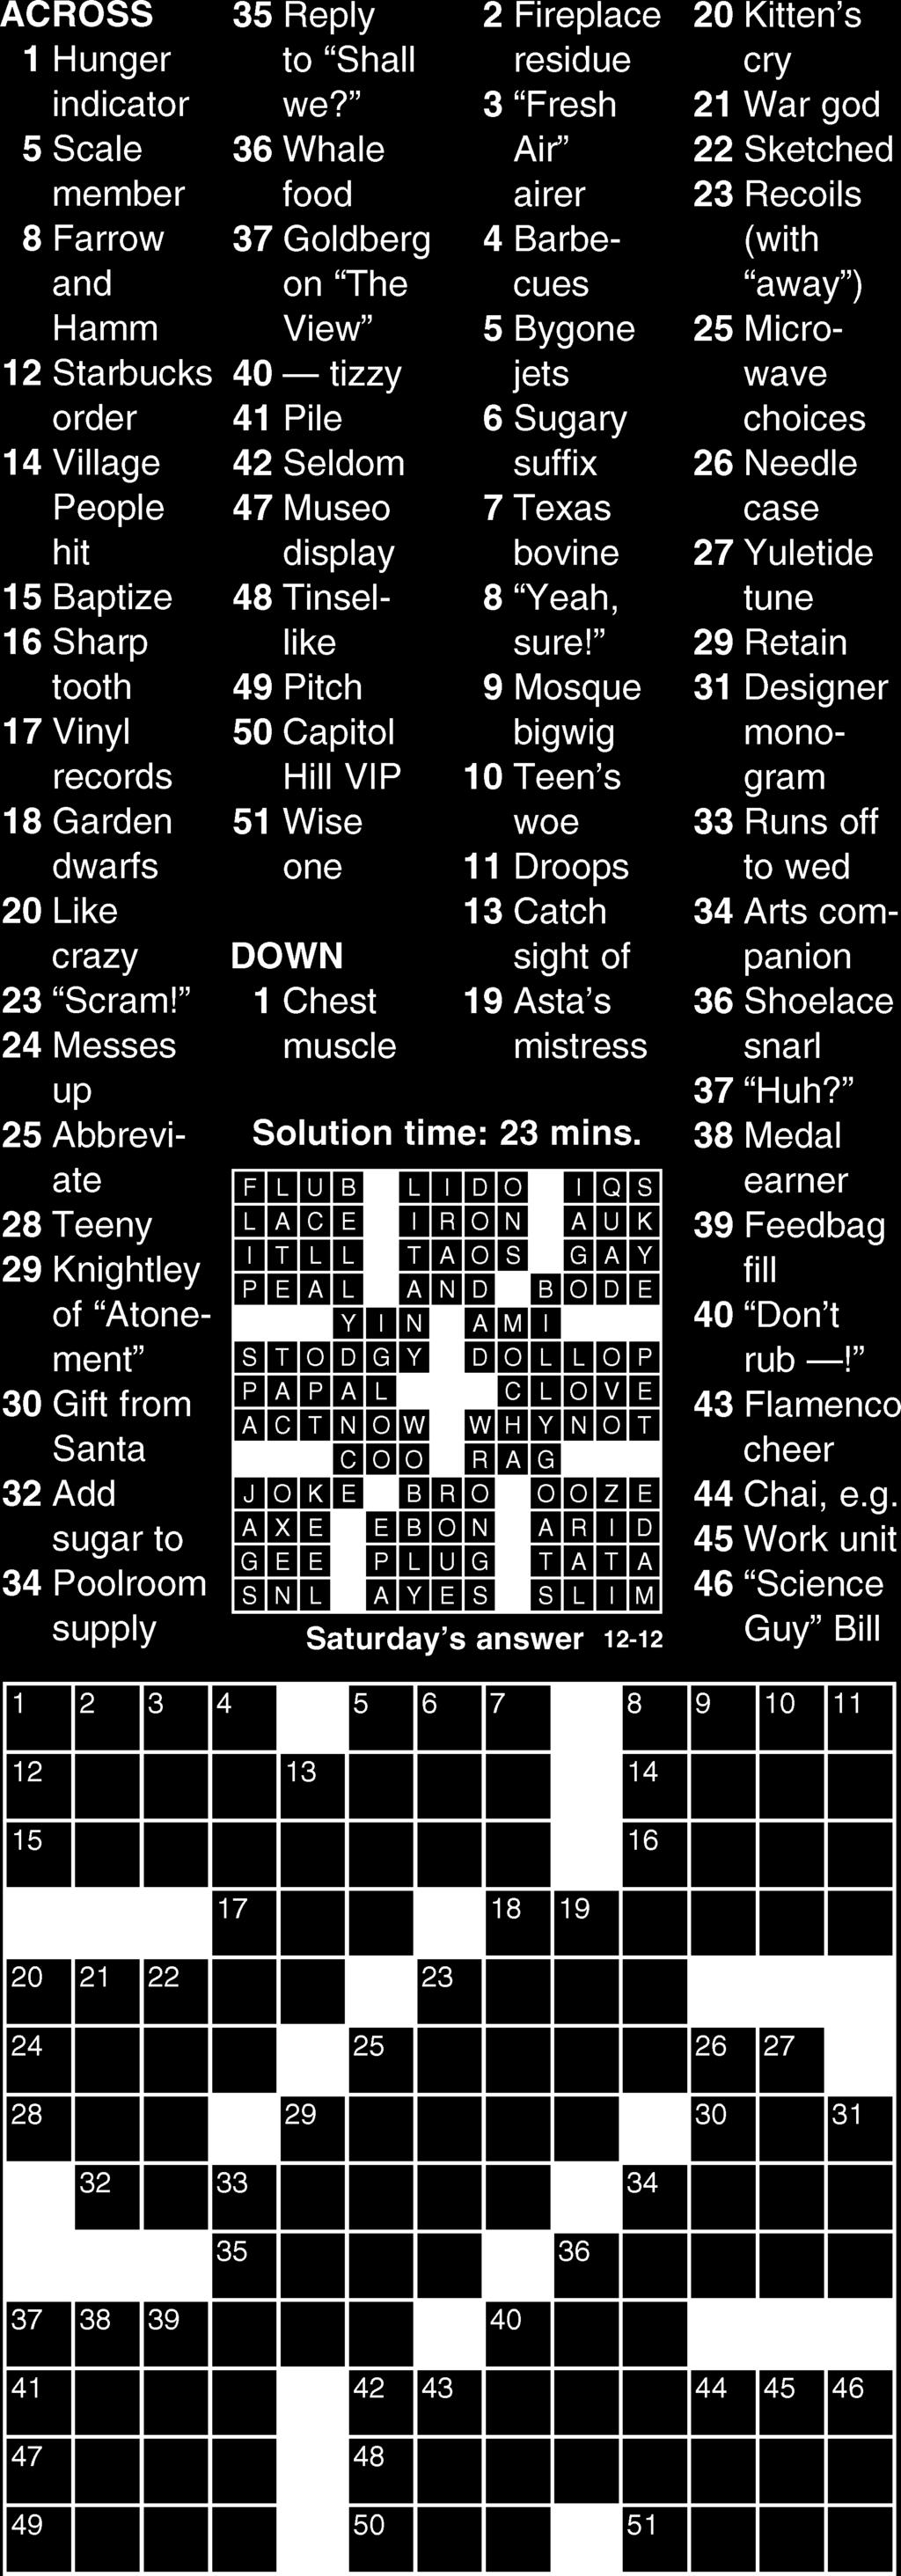 WEDNESDAY 7 DECEMBER 2016 BRAIN TEASERS 15 CROSSWORD CONCEPTIS SUDOKU Conceptis Sudoku: Conceptis Sudoku is a number-placing puzzle based on a 9 9 grid.